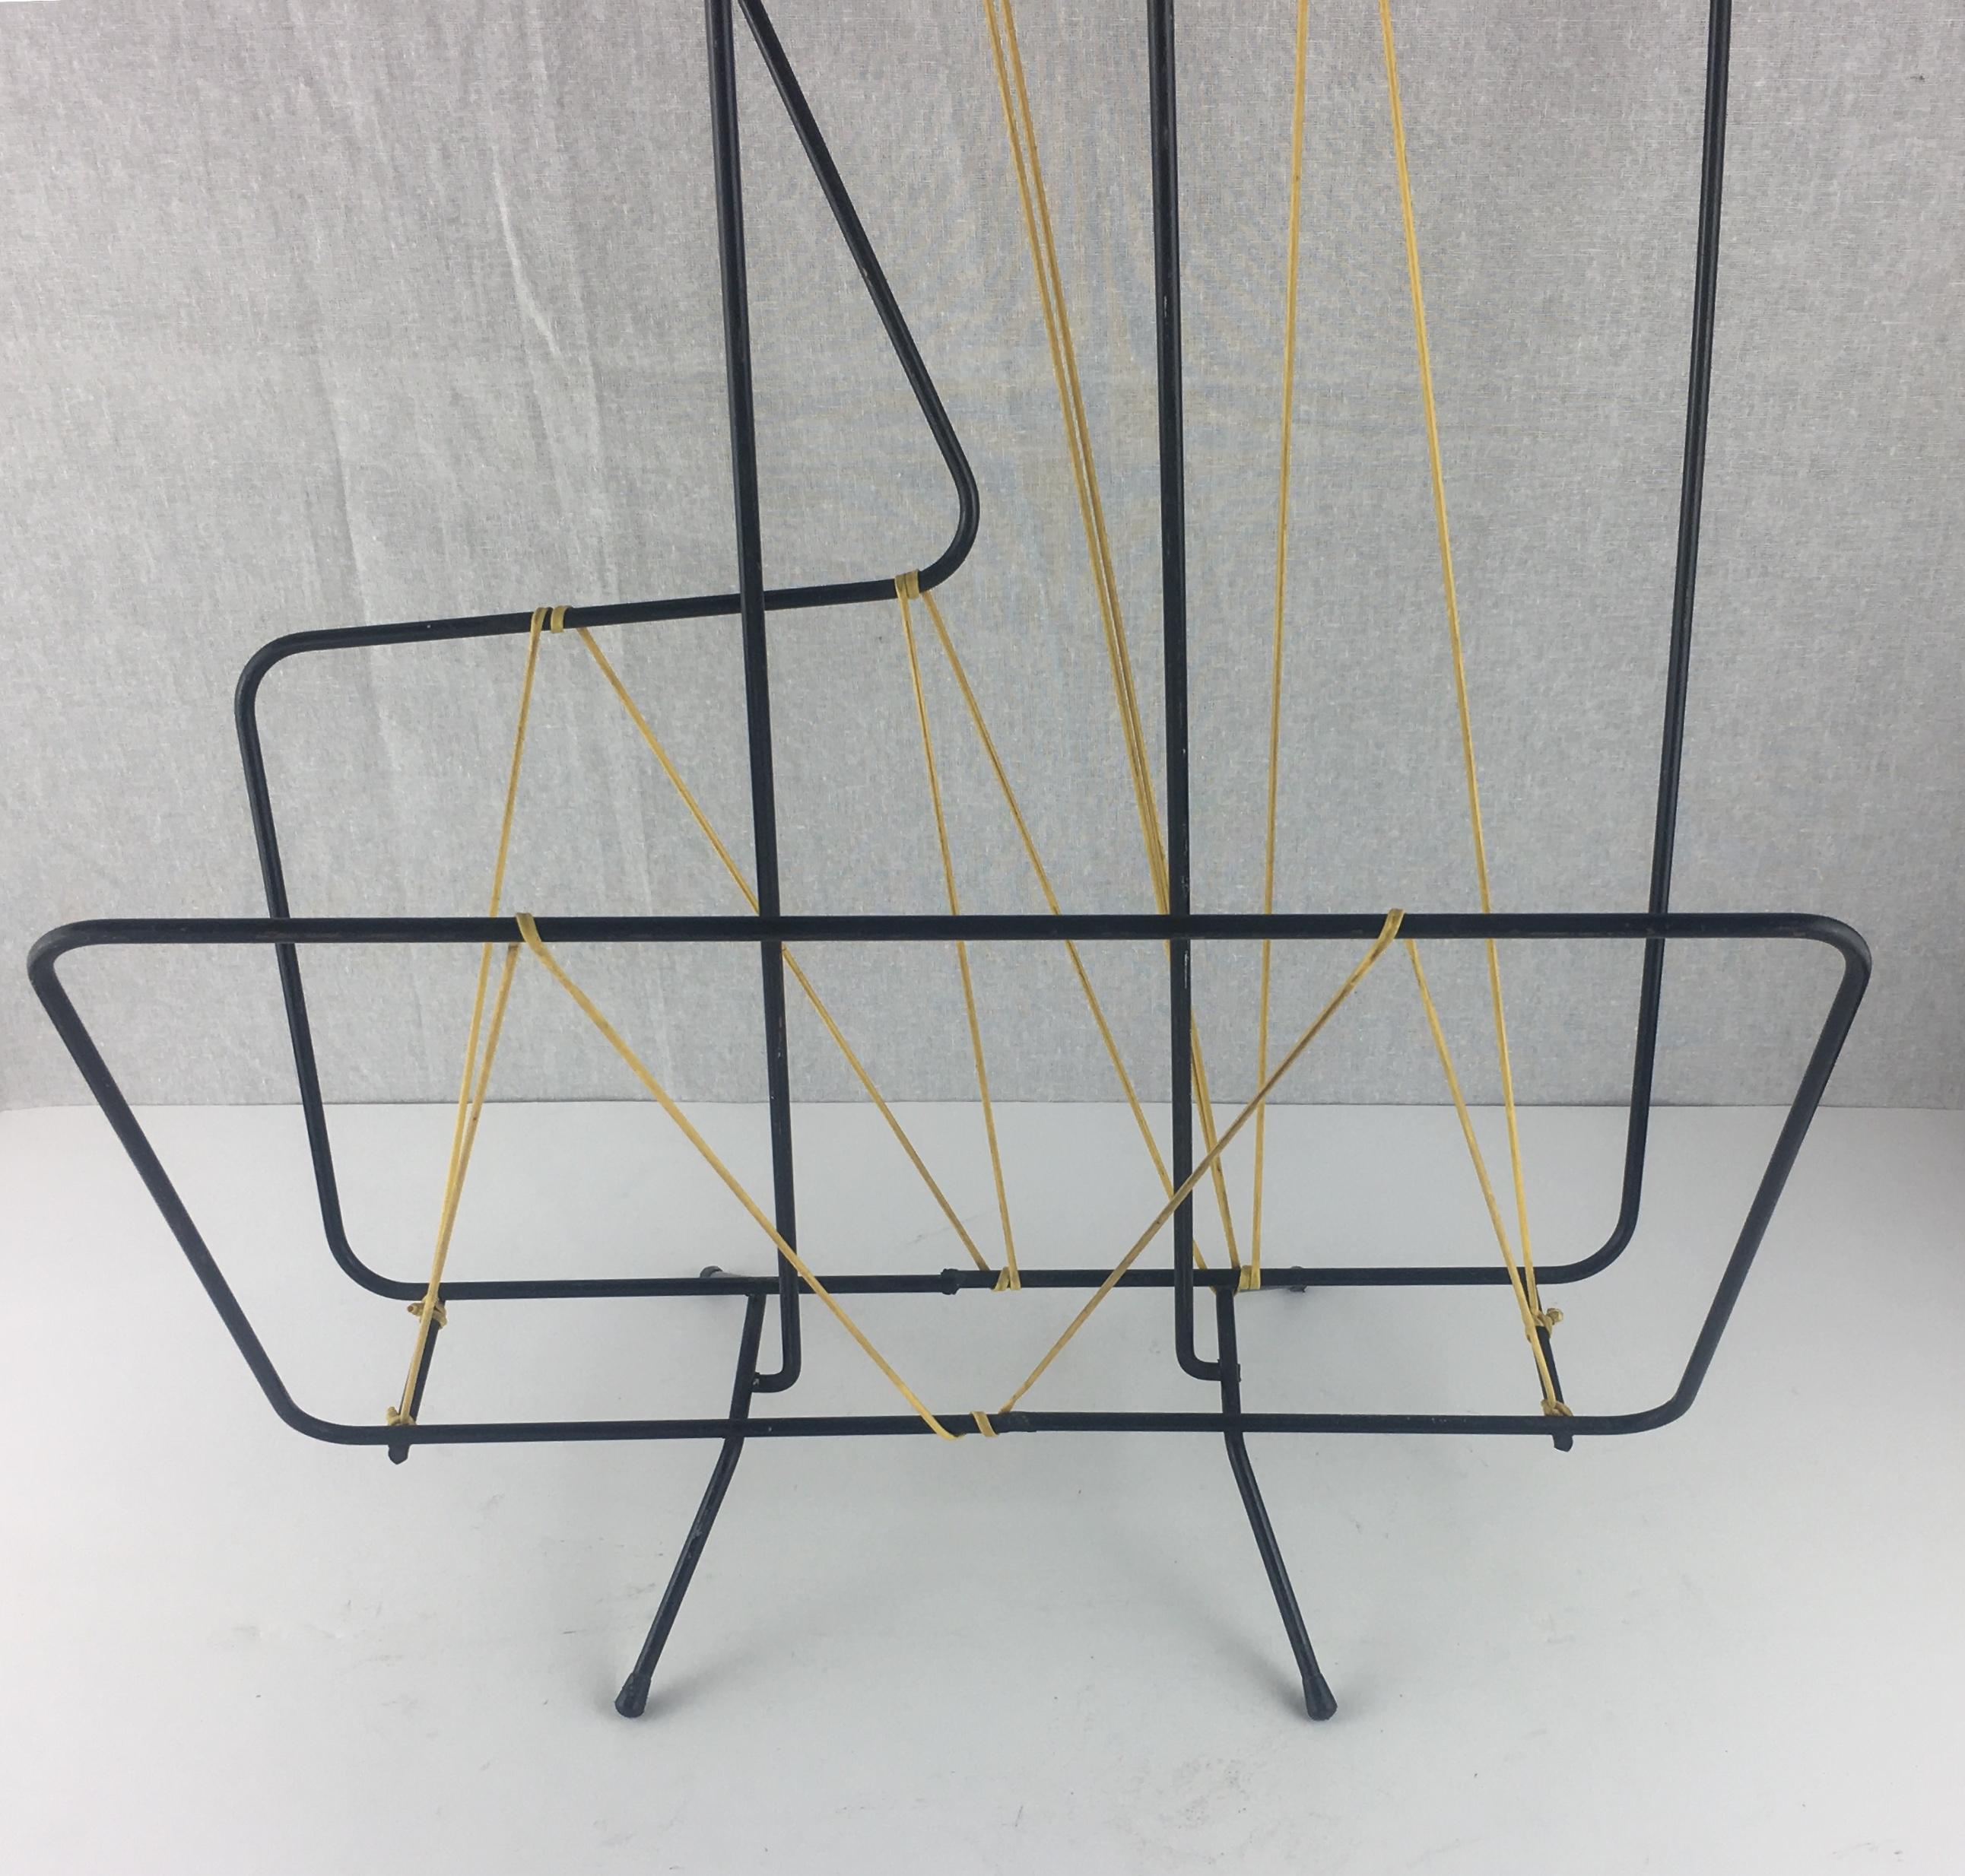 This vintage magazine or newspaper rack was produced in the 1960s.

Very good condition — This item has no defects, but it may show slight traces of use. Patina consistent with age and use.

Materials: Metal
Color Black and yellow
Measures: